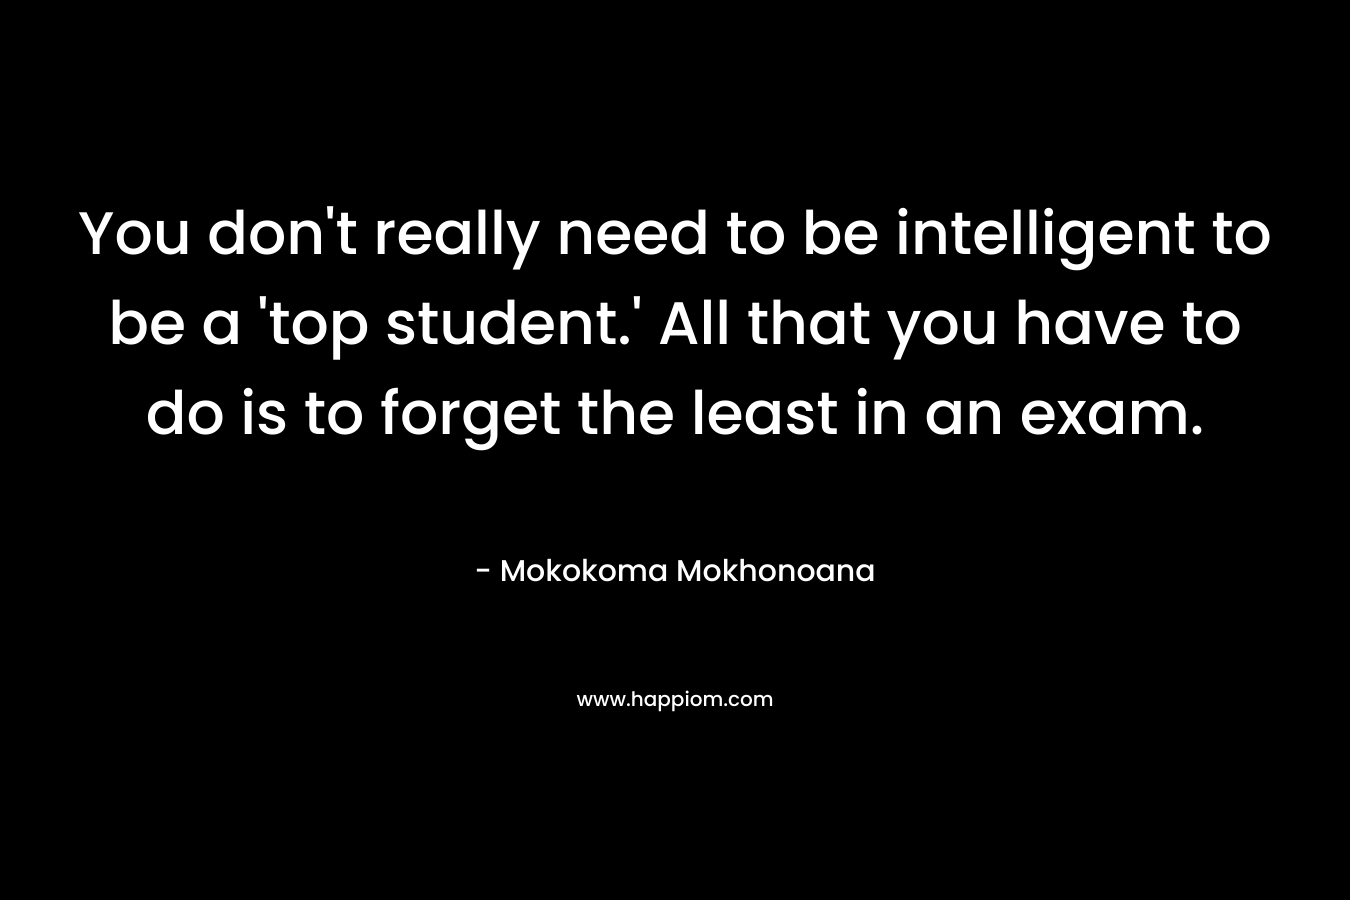 You don't really need to be intelligent to be a 'top student.' All that you have to do is to forget the least in an exam.